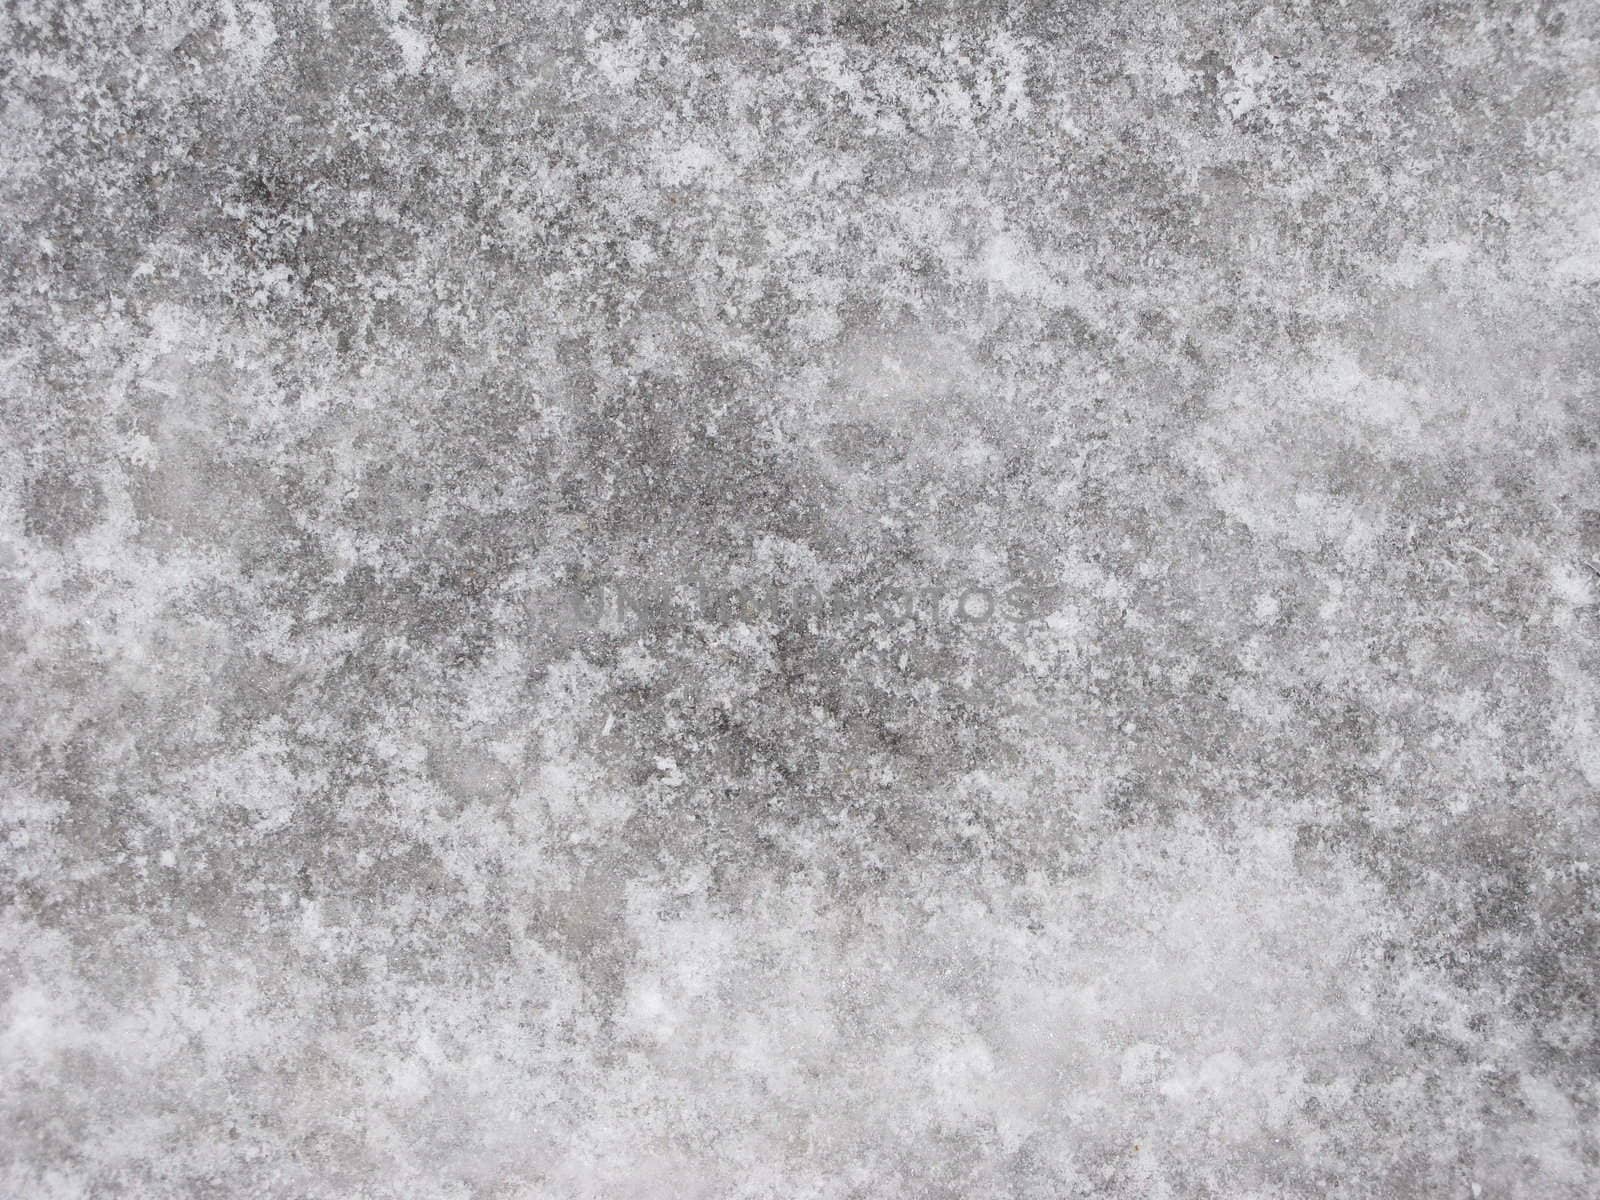 Ice-covered pavement surface texture, useful as background